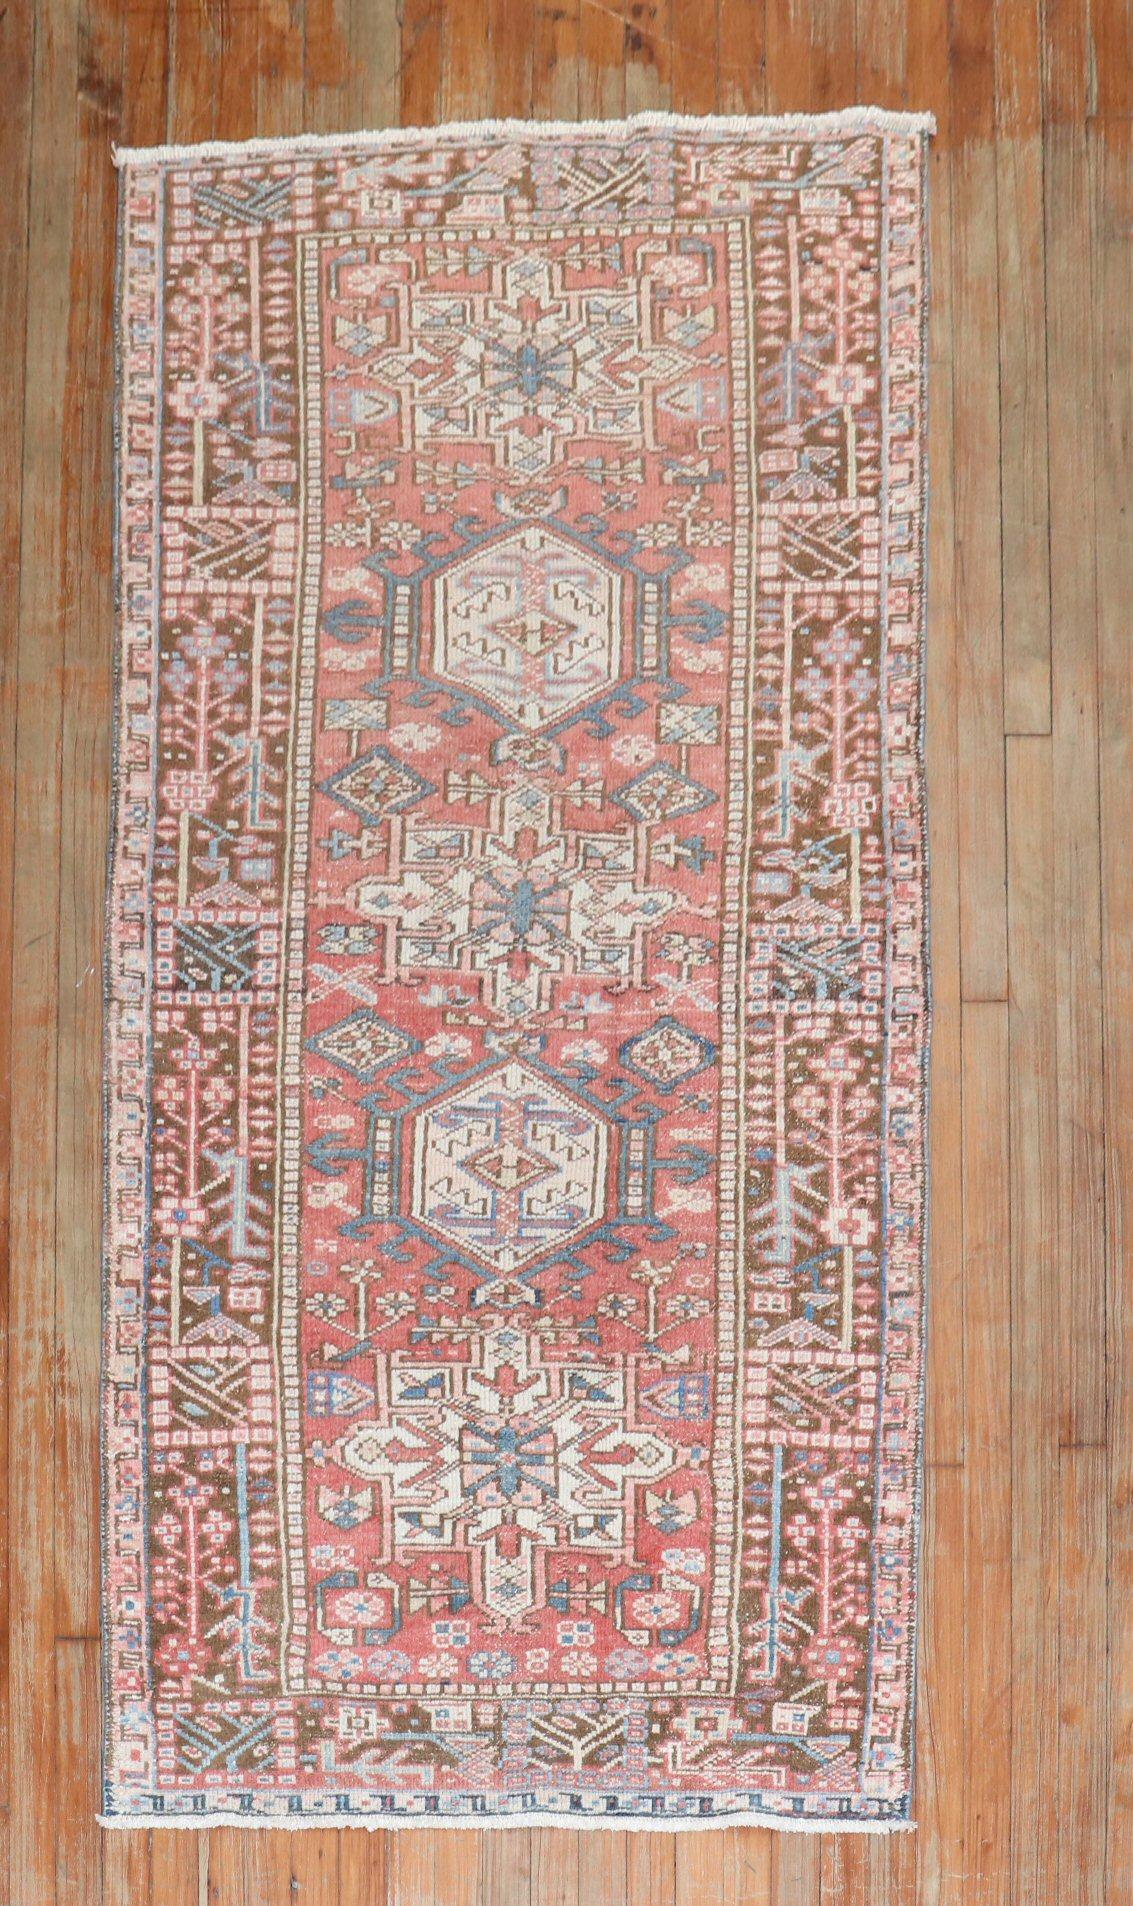 Persian Heriz Karadja runner from the middle of the 20th century

Measures: 3'4” x 6'7”.